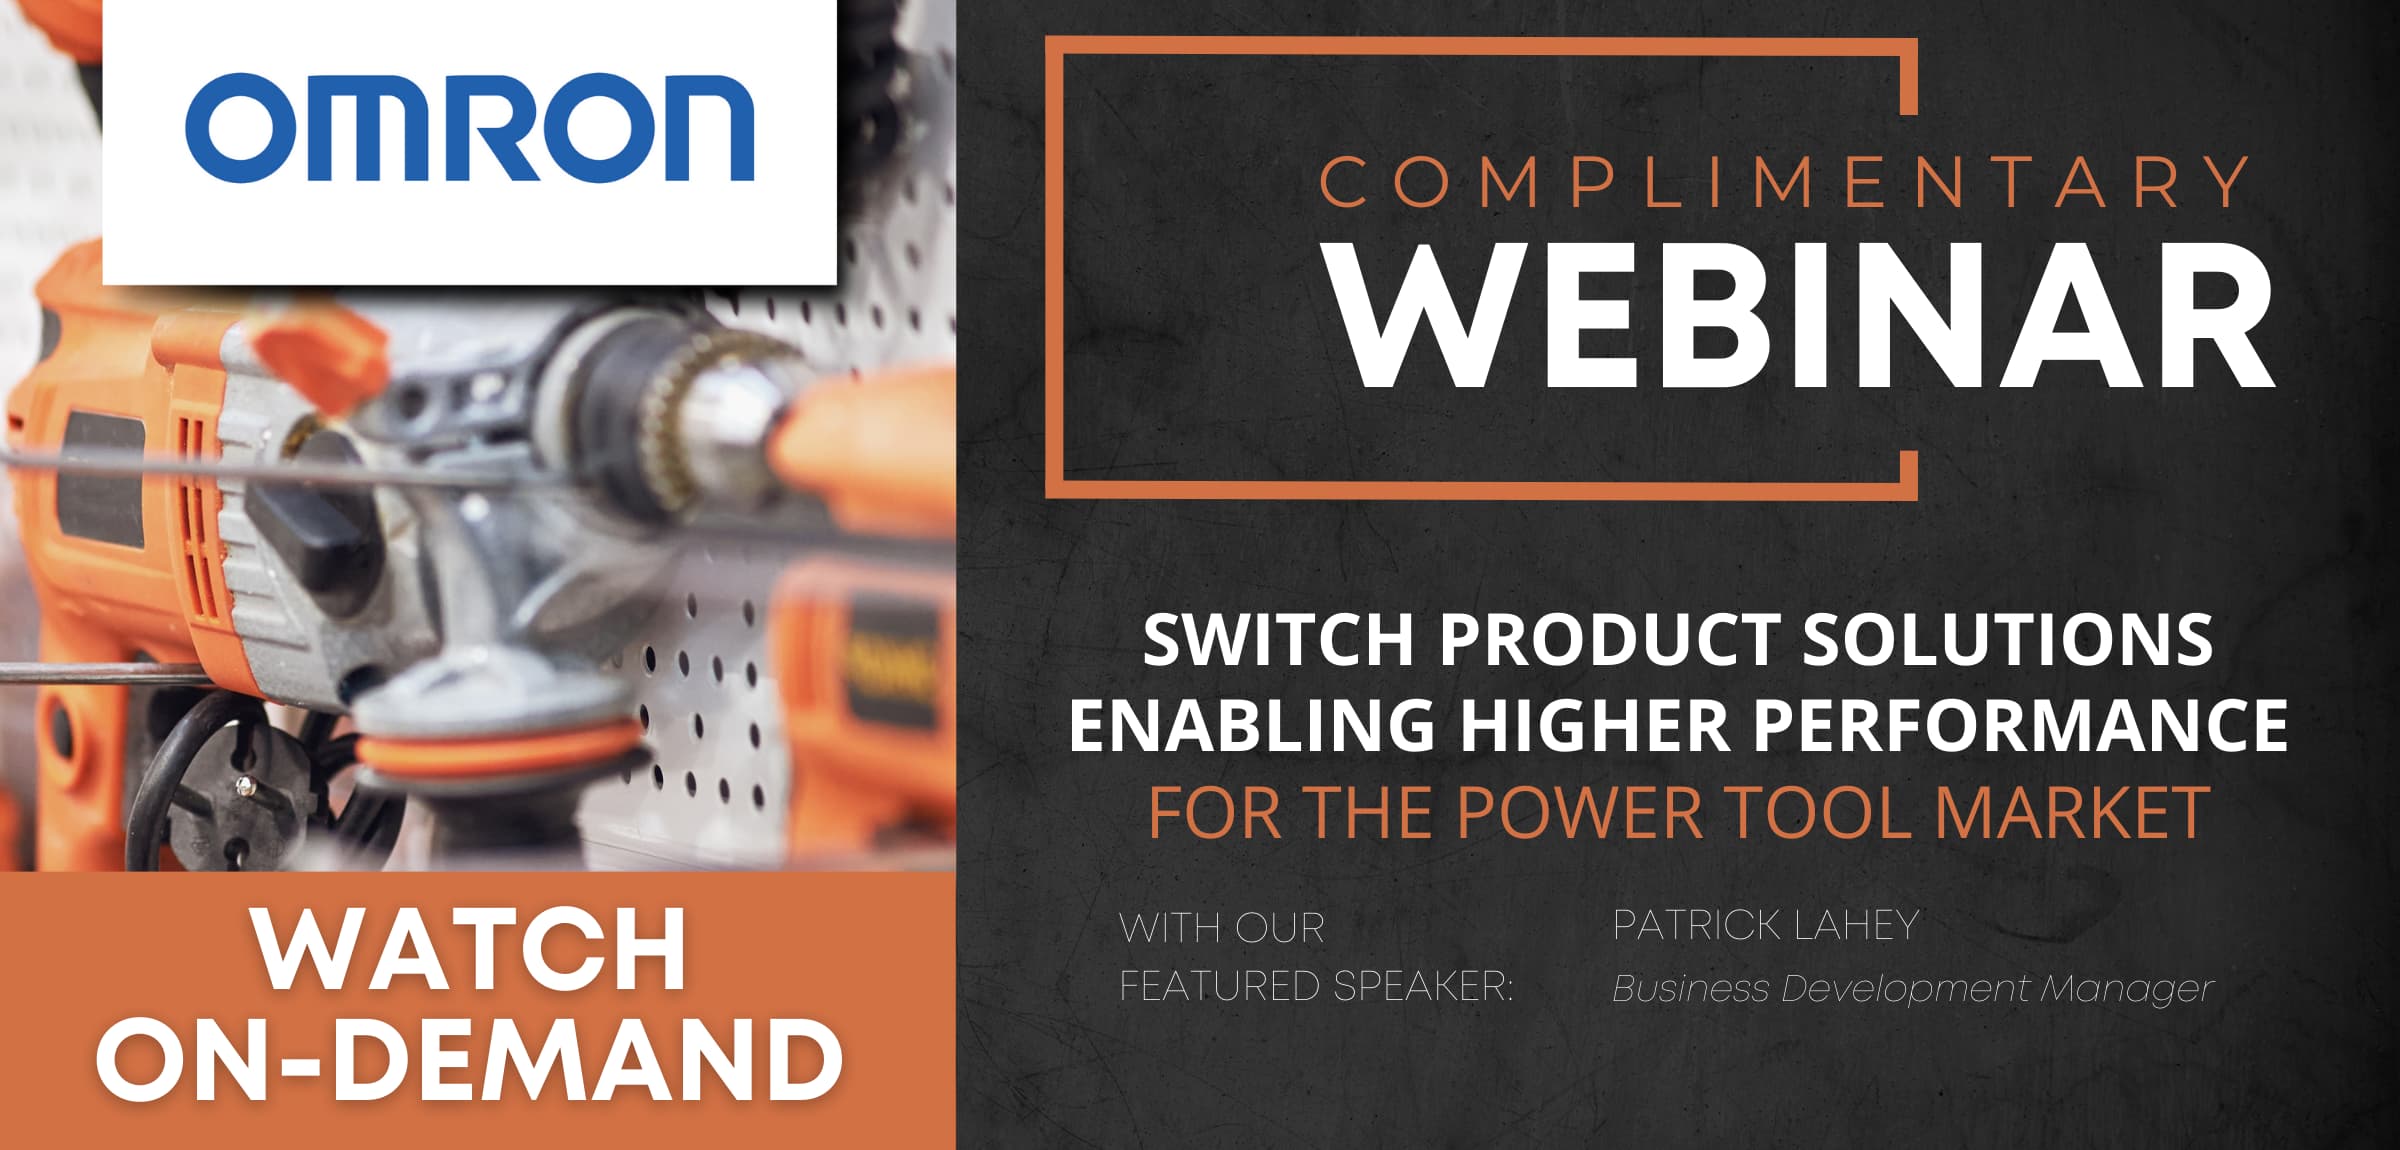 OMRON COMPLIMENTARY WEBINAR | SWITCH PRODUCT SOLUTIONS ENABLING HIGHER PERFORMANCE FOR THE POWER TOOL MARKET | WIHT OUR FEATURED SPEAKER: PATRICK LAHEY / Business Development Manager | WATCH ON-DEMAND